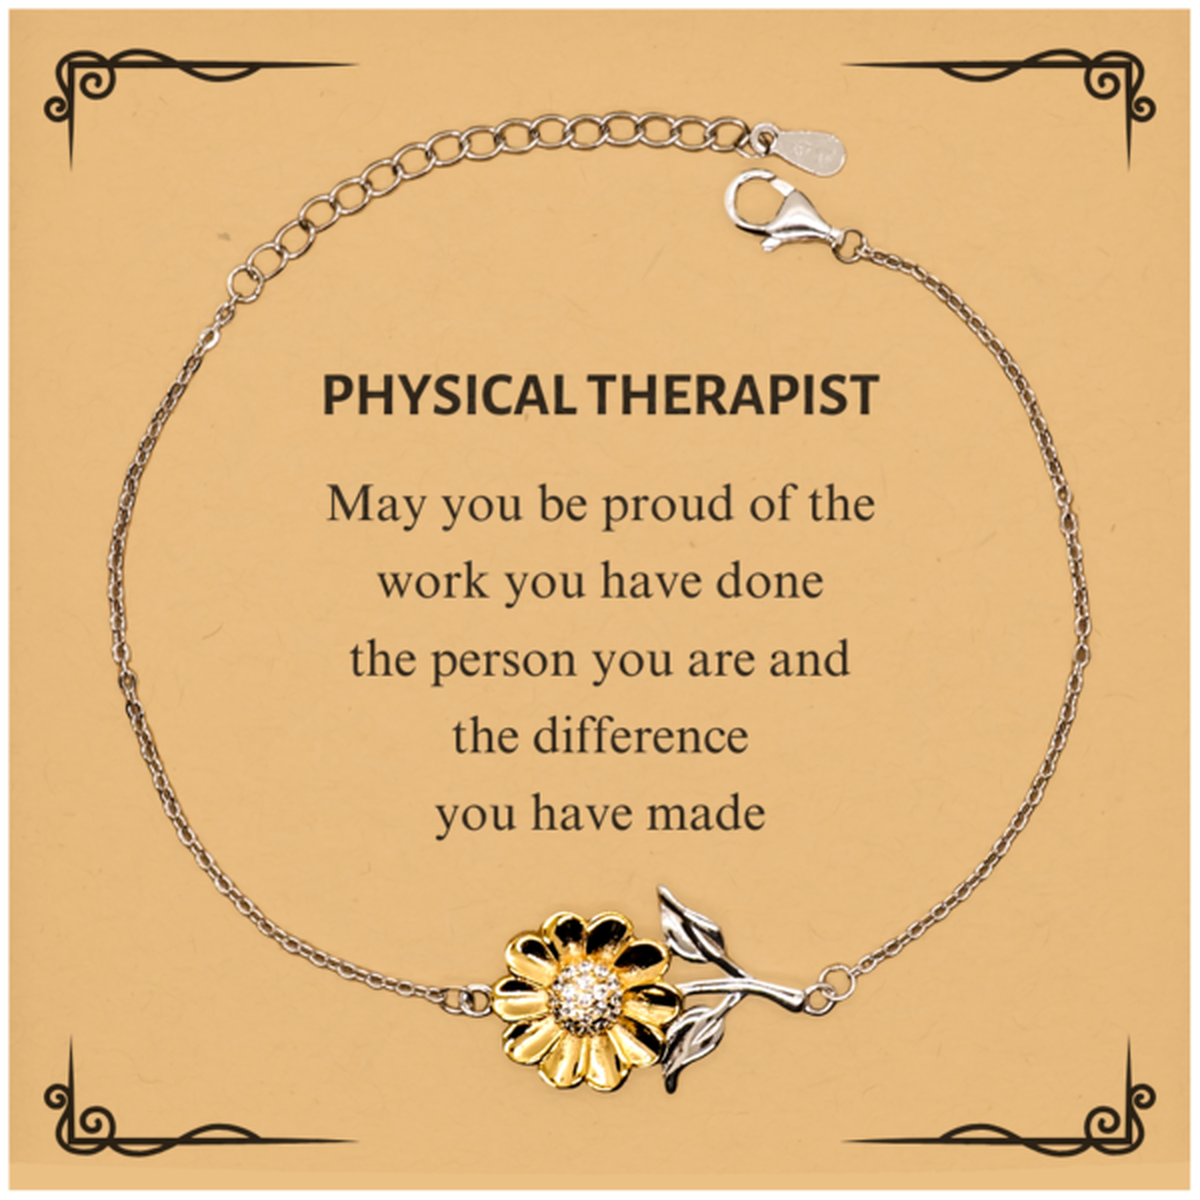 Physical Therapist May you be proud of the work you have done, Retirement Physical Therapist Sunflower Bracelet for Colleague Appreciation Gifts Amazing for Physical Therapist